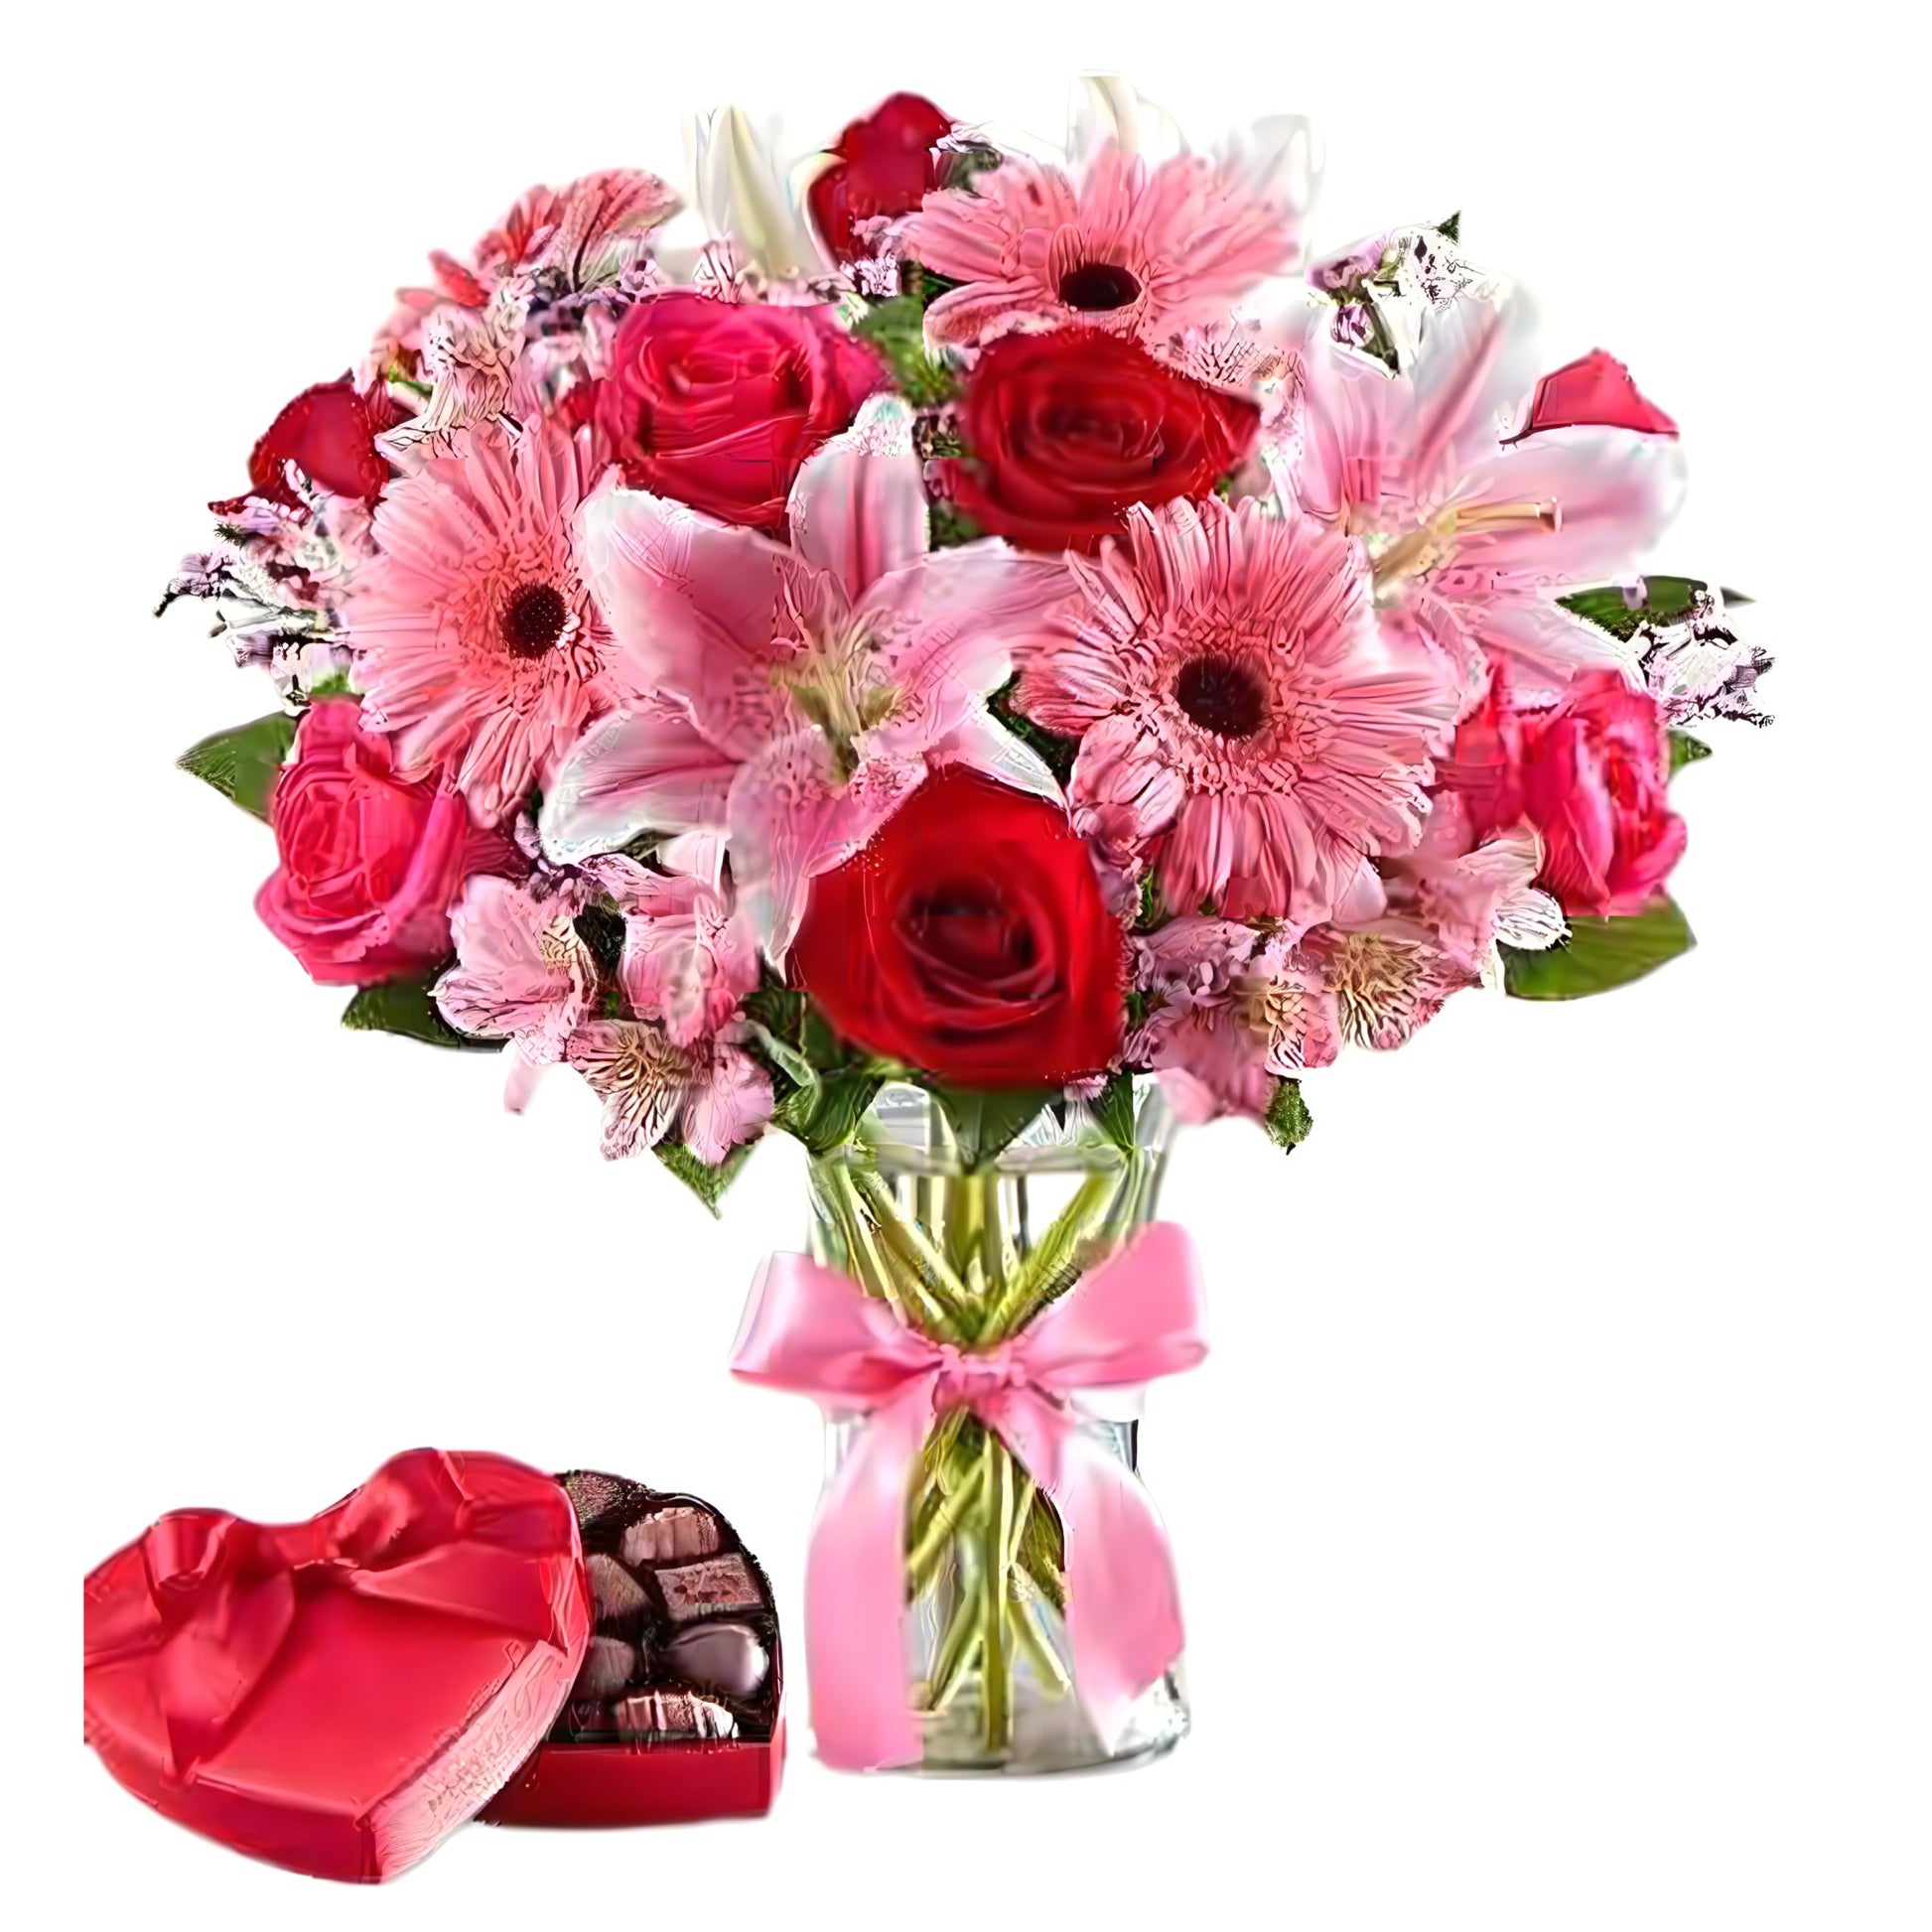 My Valentine Love With Chocolate - Floral Arrangement - Flower Delivery Brooklyn